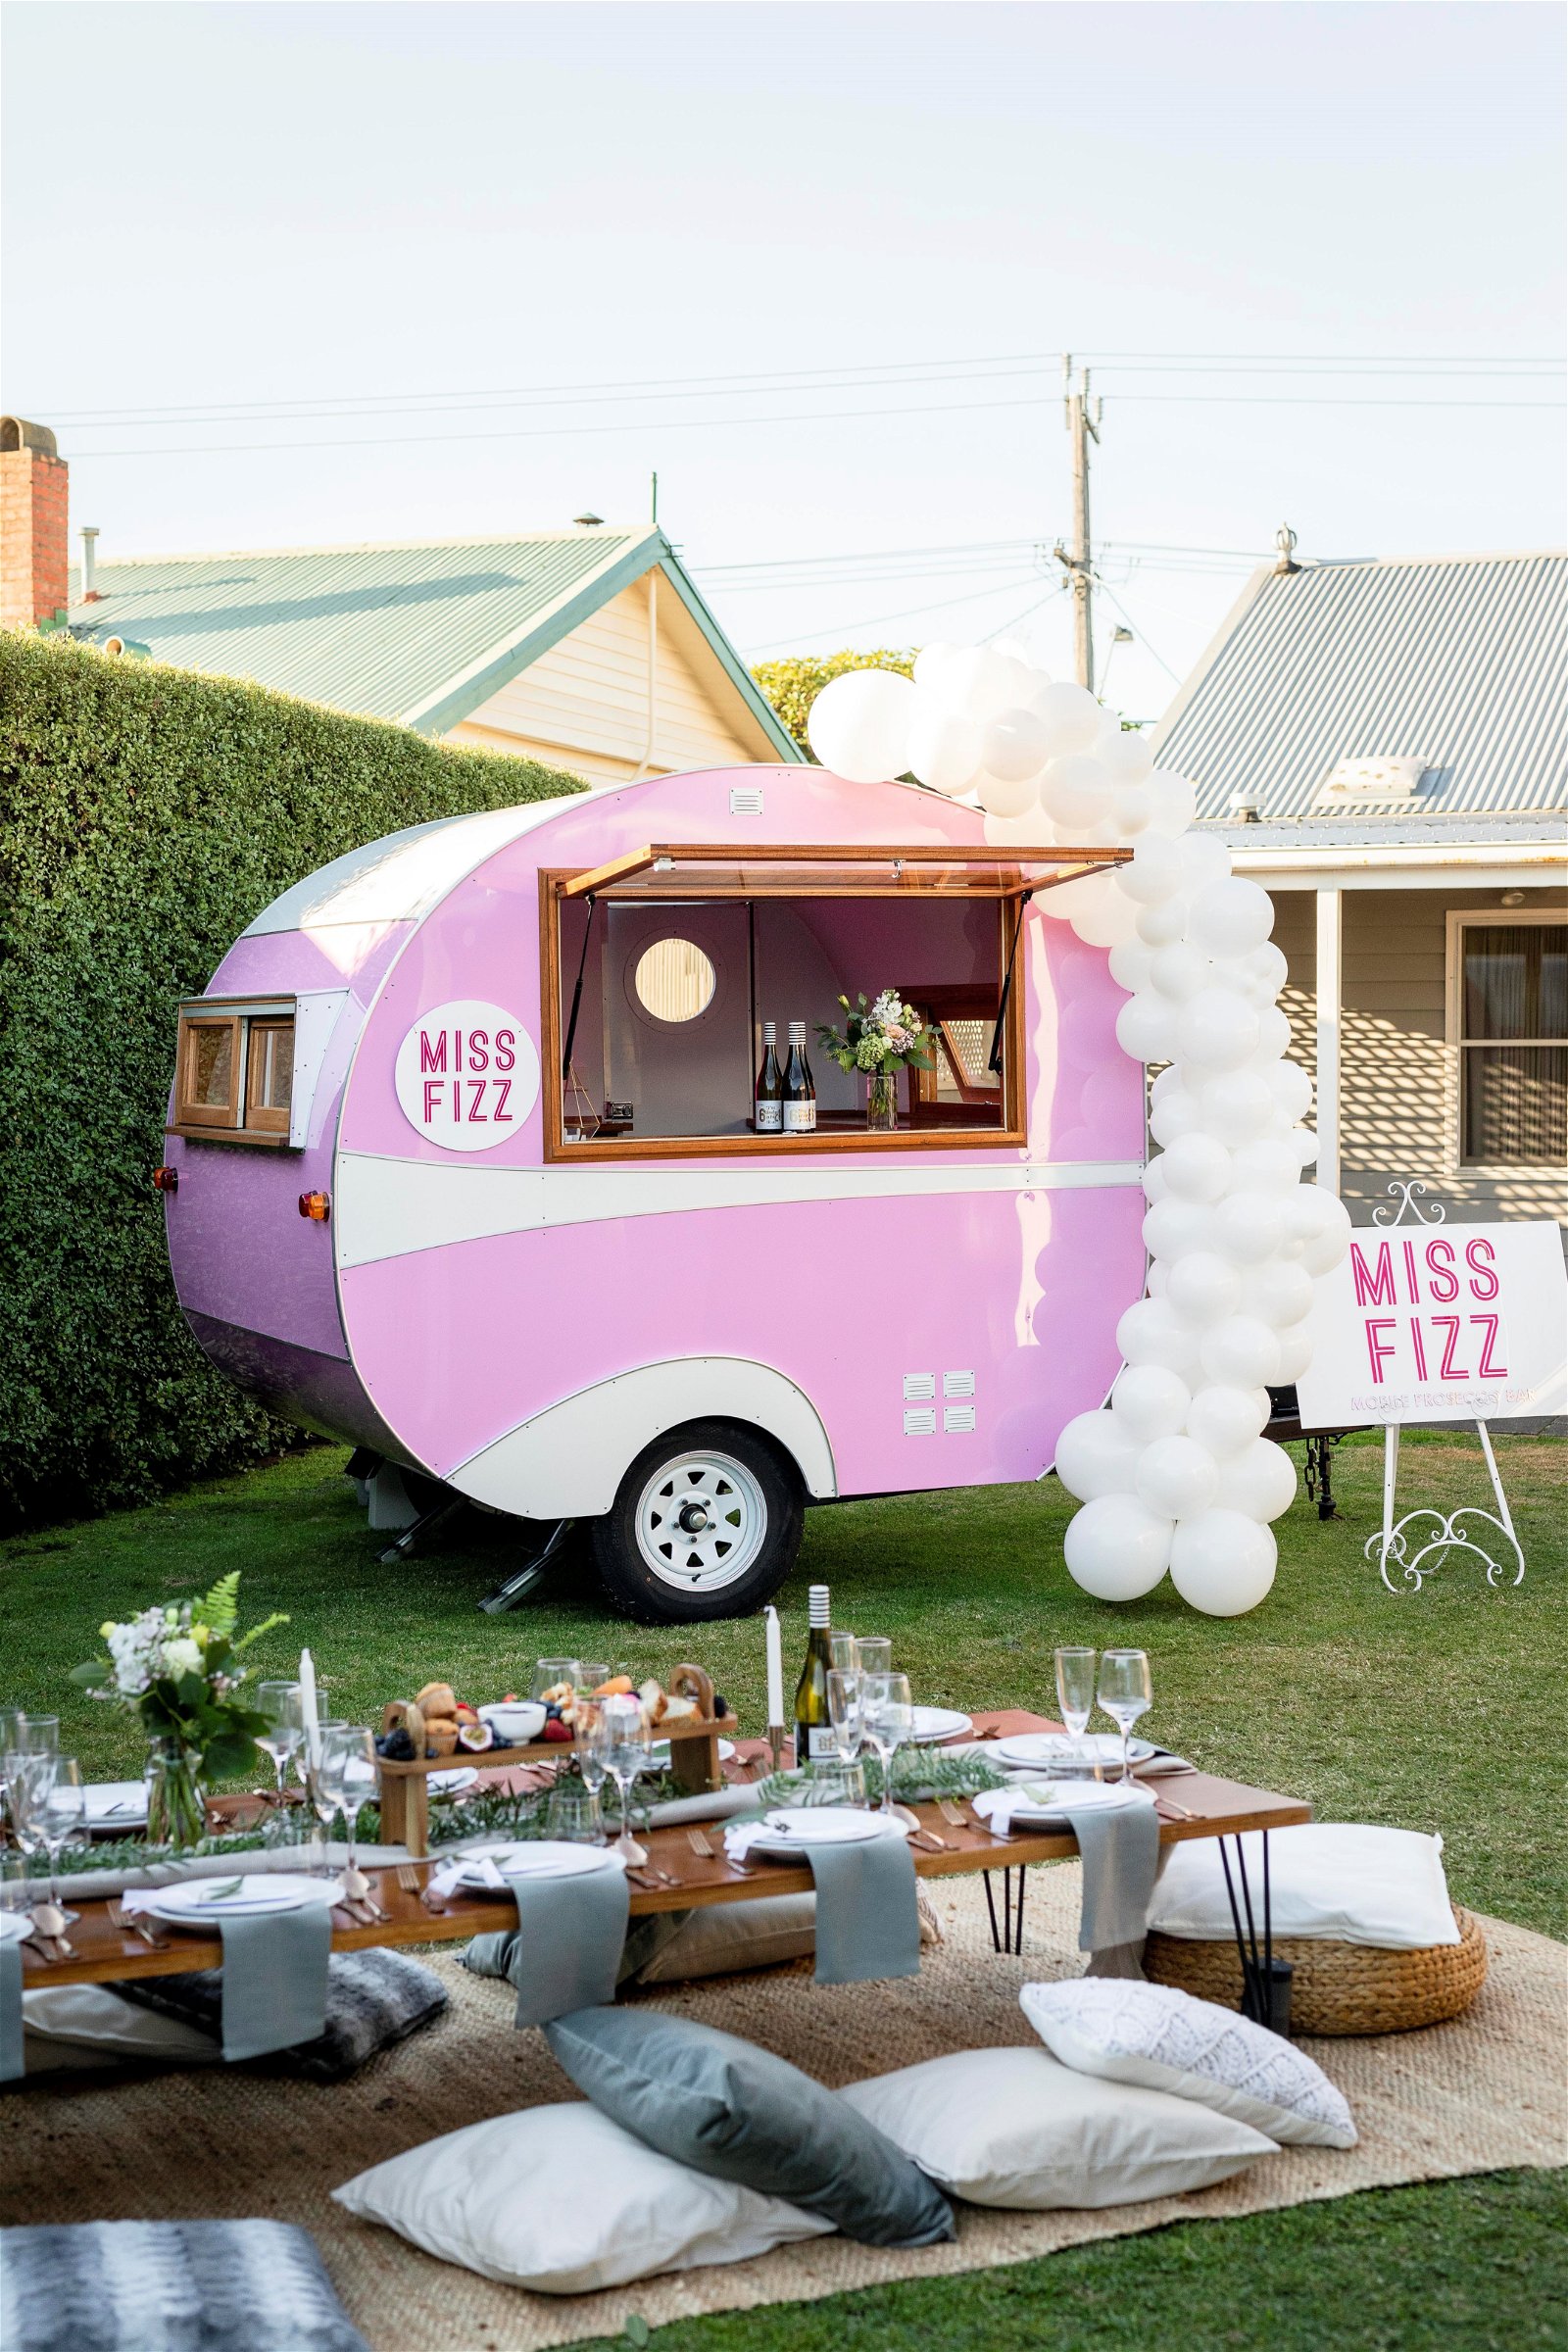 Miss Fizz - Mobile Prosecco Bar - Great Ocean Road Tourism